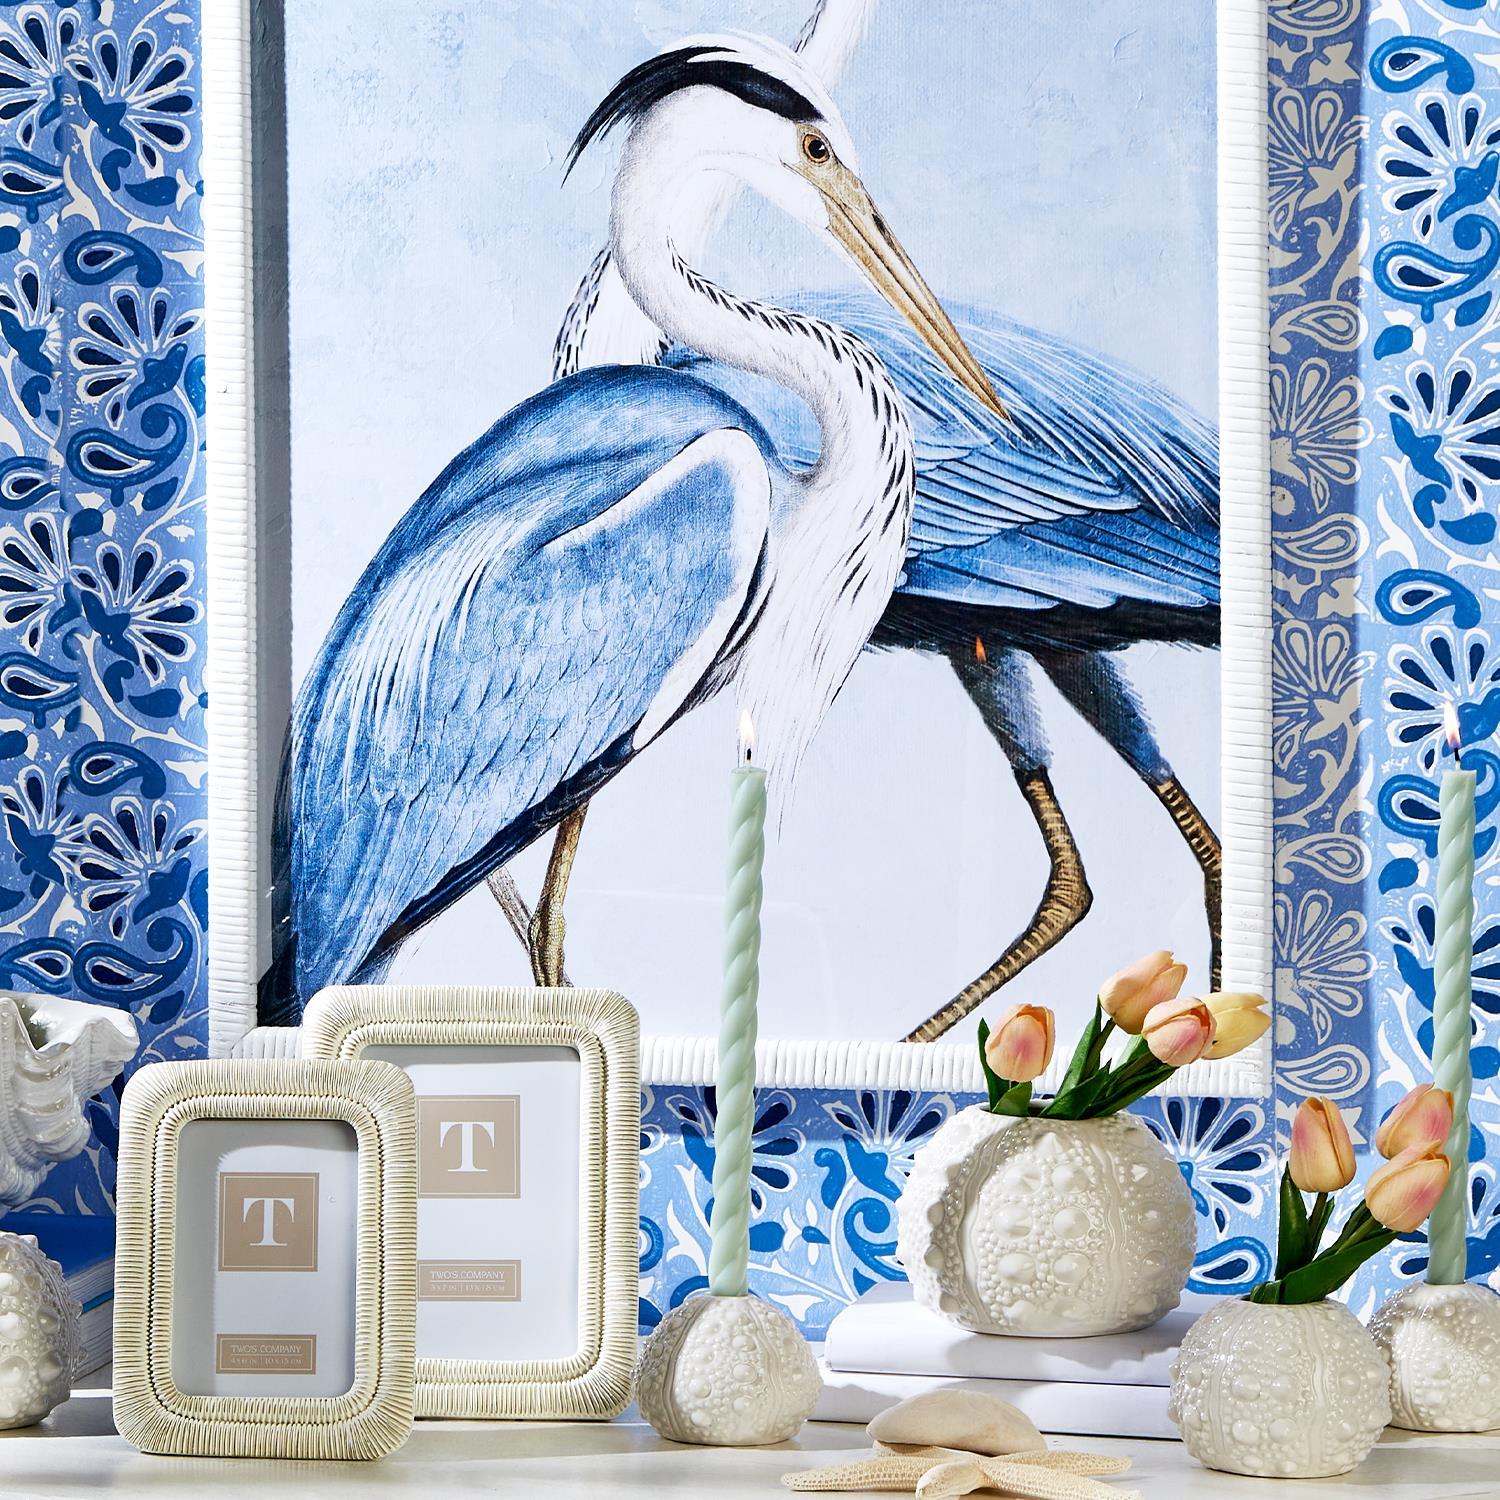 Water Bird Wall Art in Hand-Crafted Rattan Frame